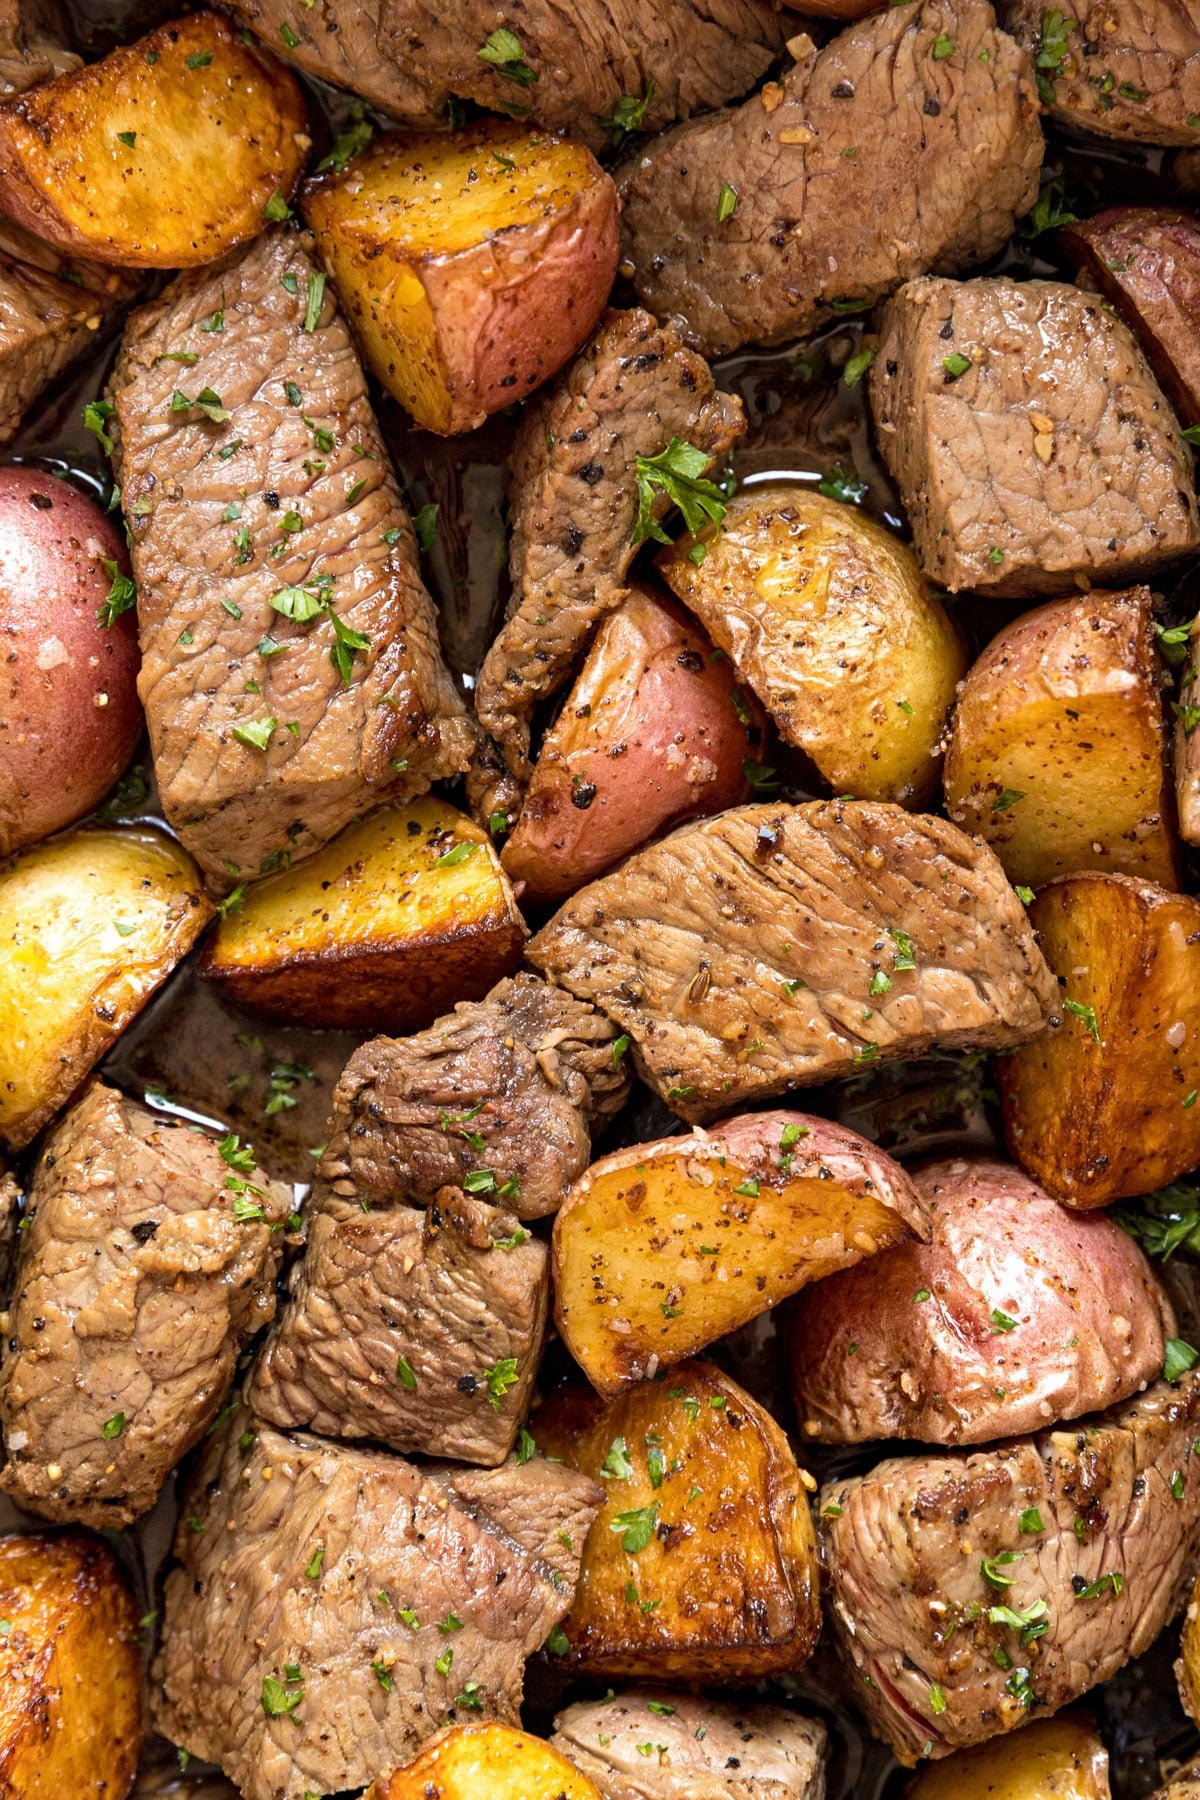 Overhead close up image of cooked steak and potatoes.